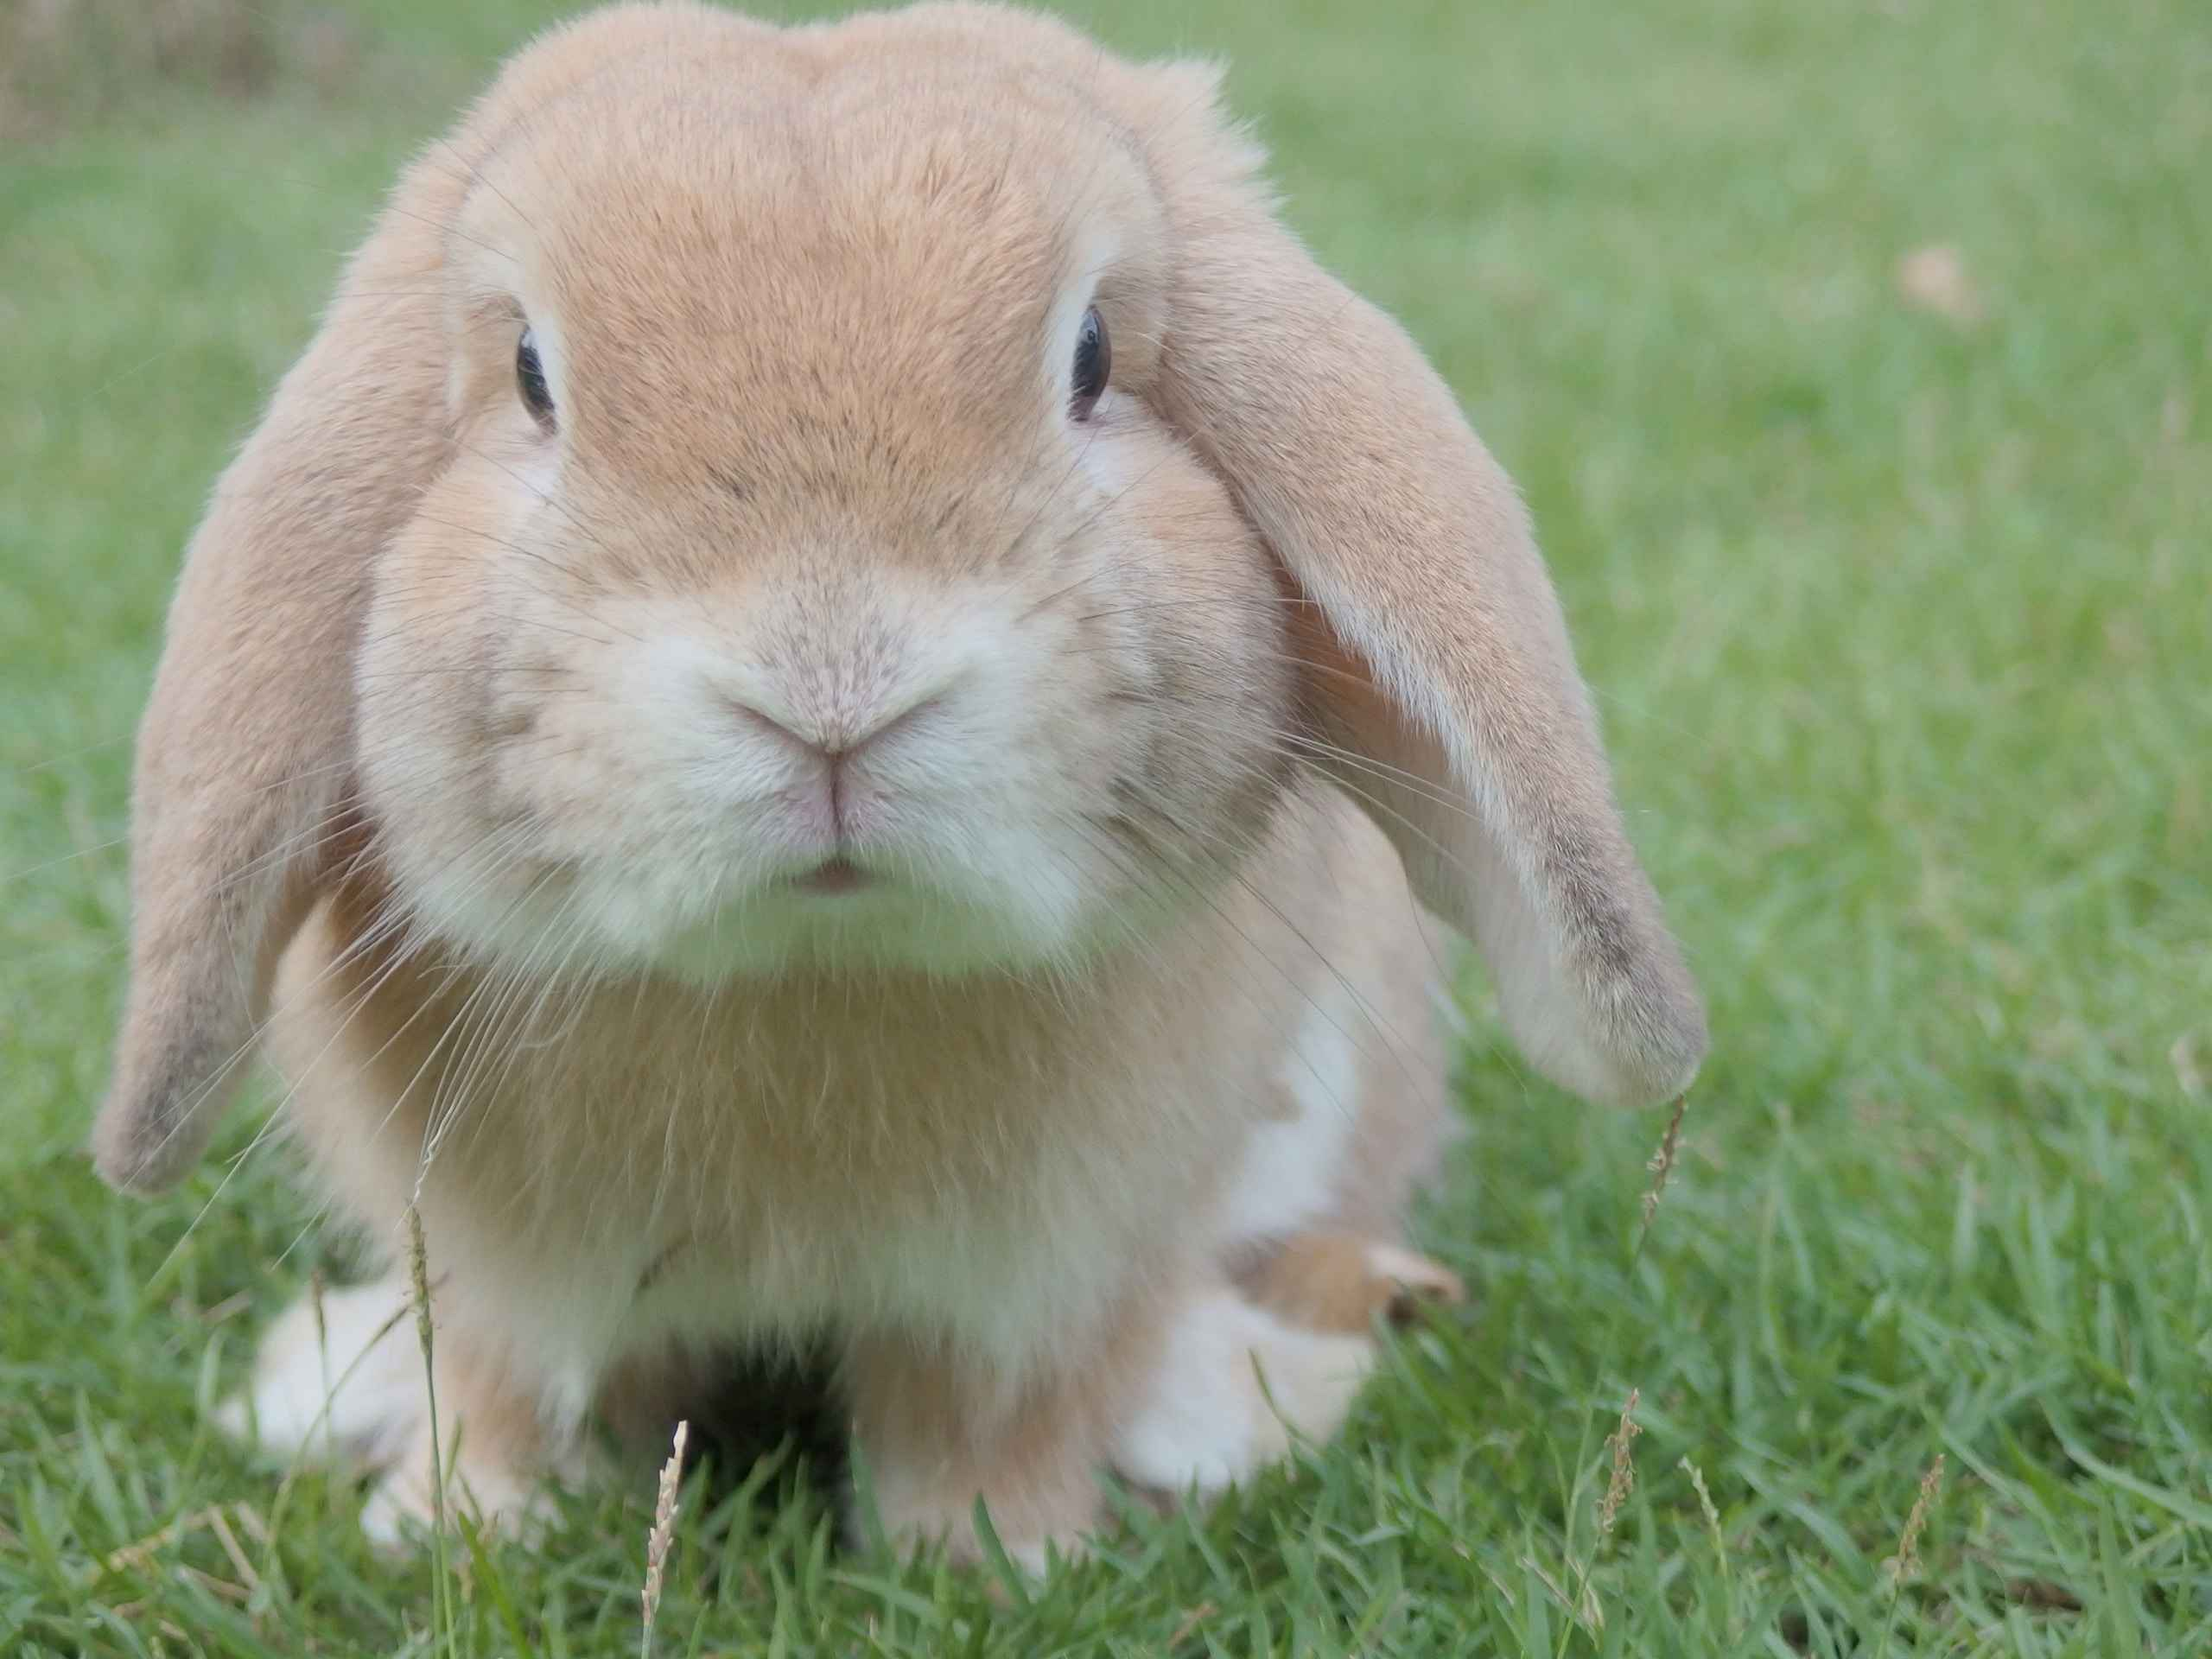 Recognizing the Signs: Symptoms of Foreign Object Ingestion in Rabbits